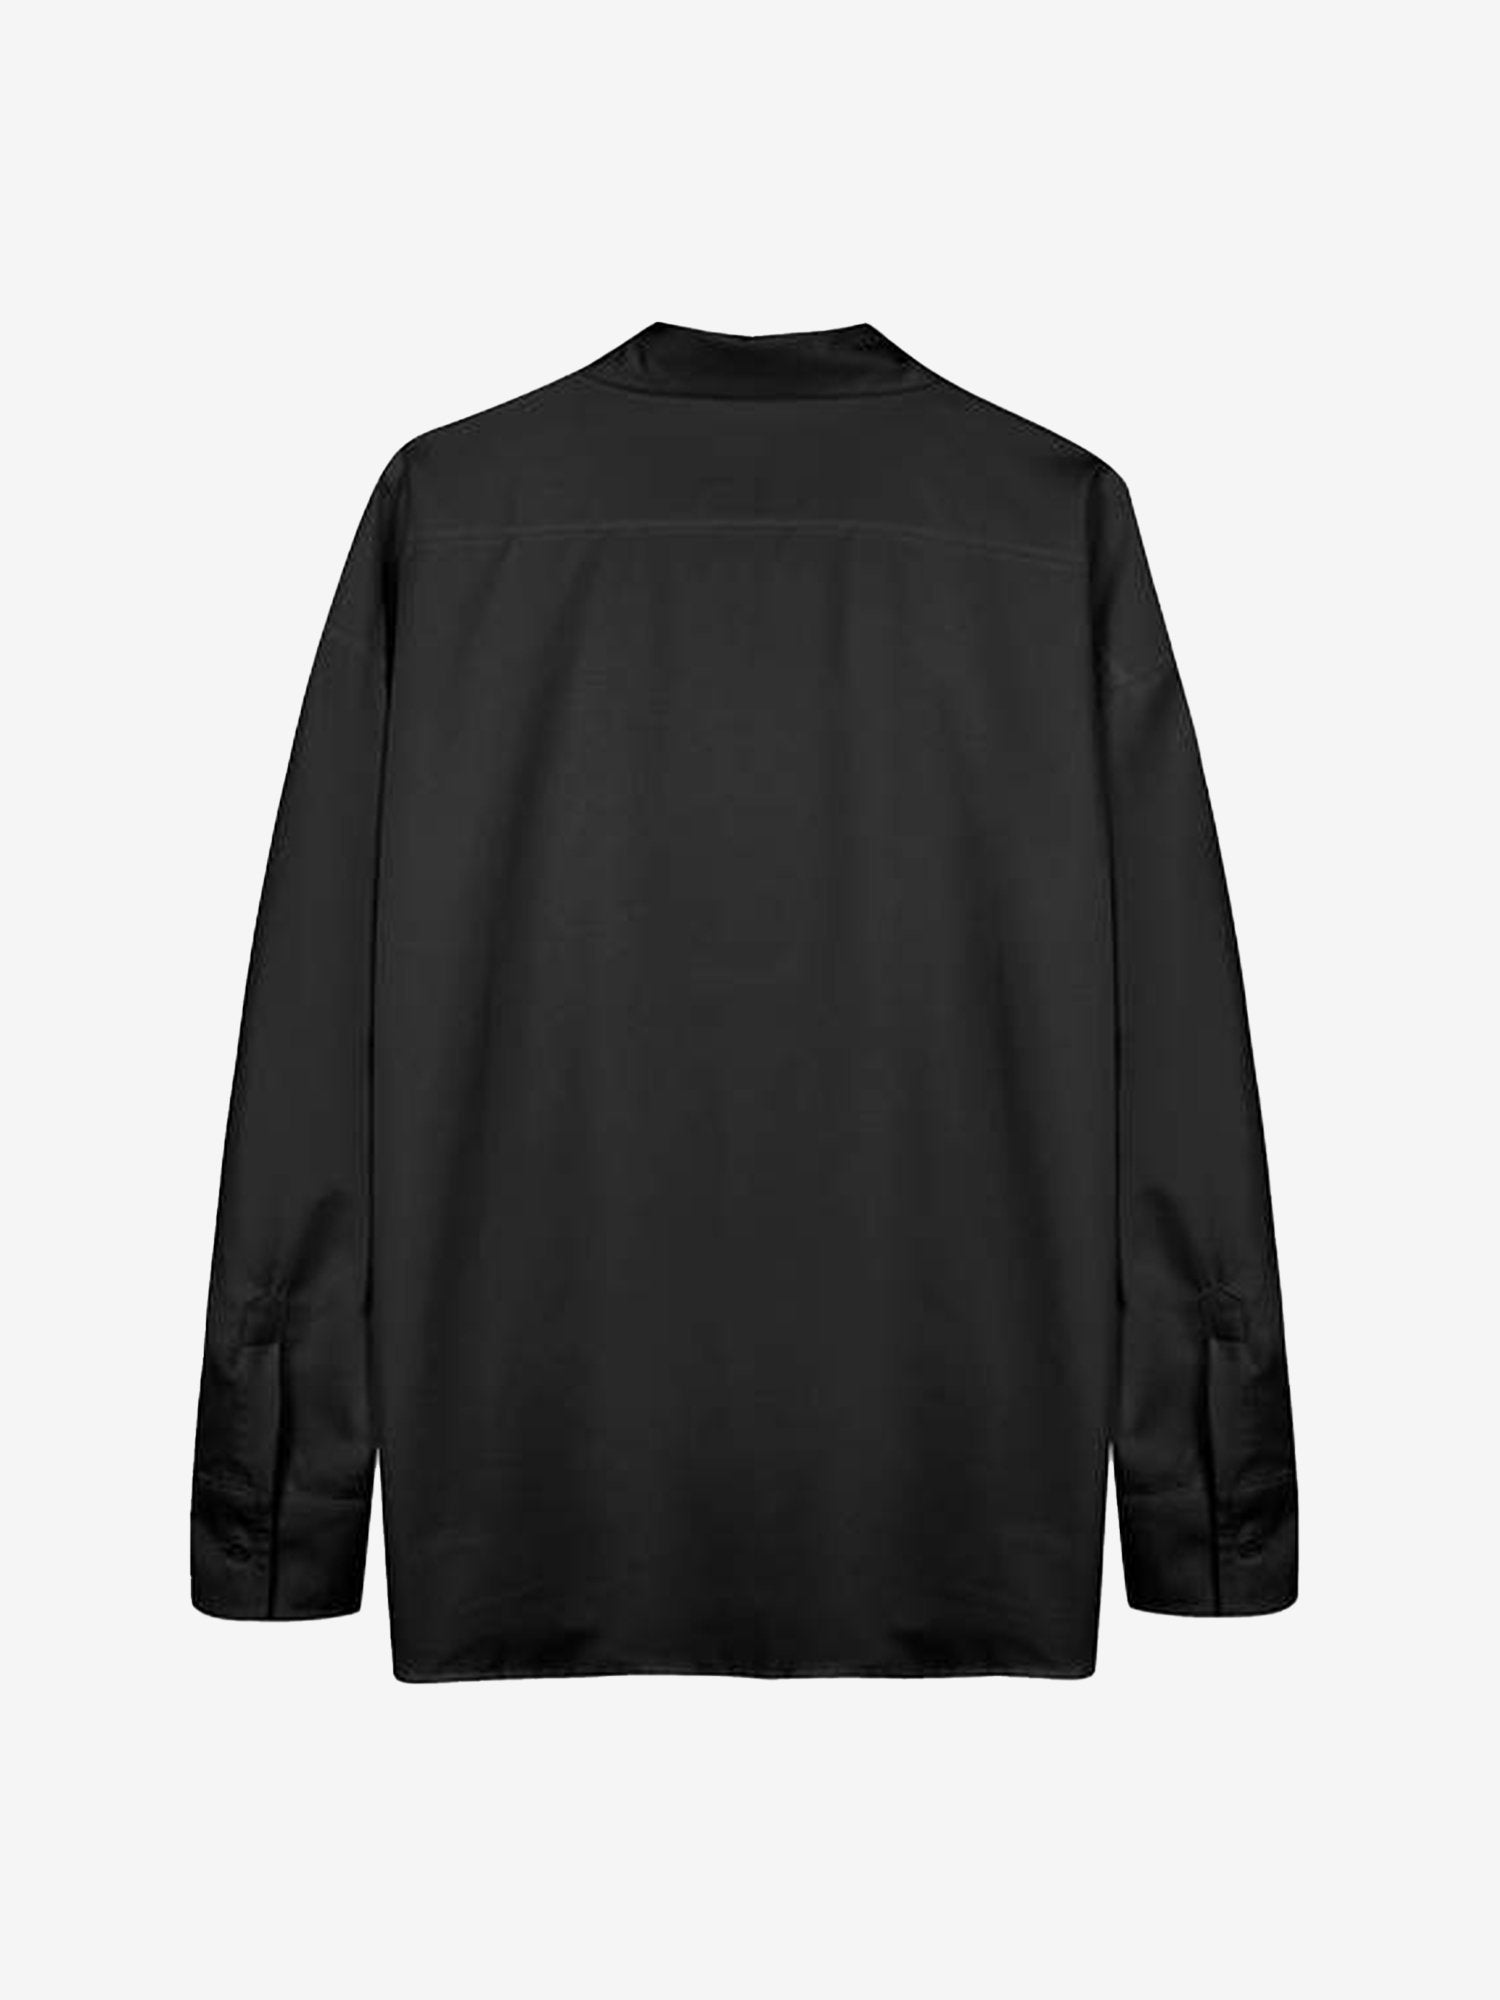 JUSTNOTAG Solid Color Hanging Chain Oversized Shirts